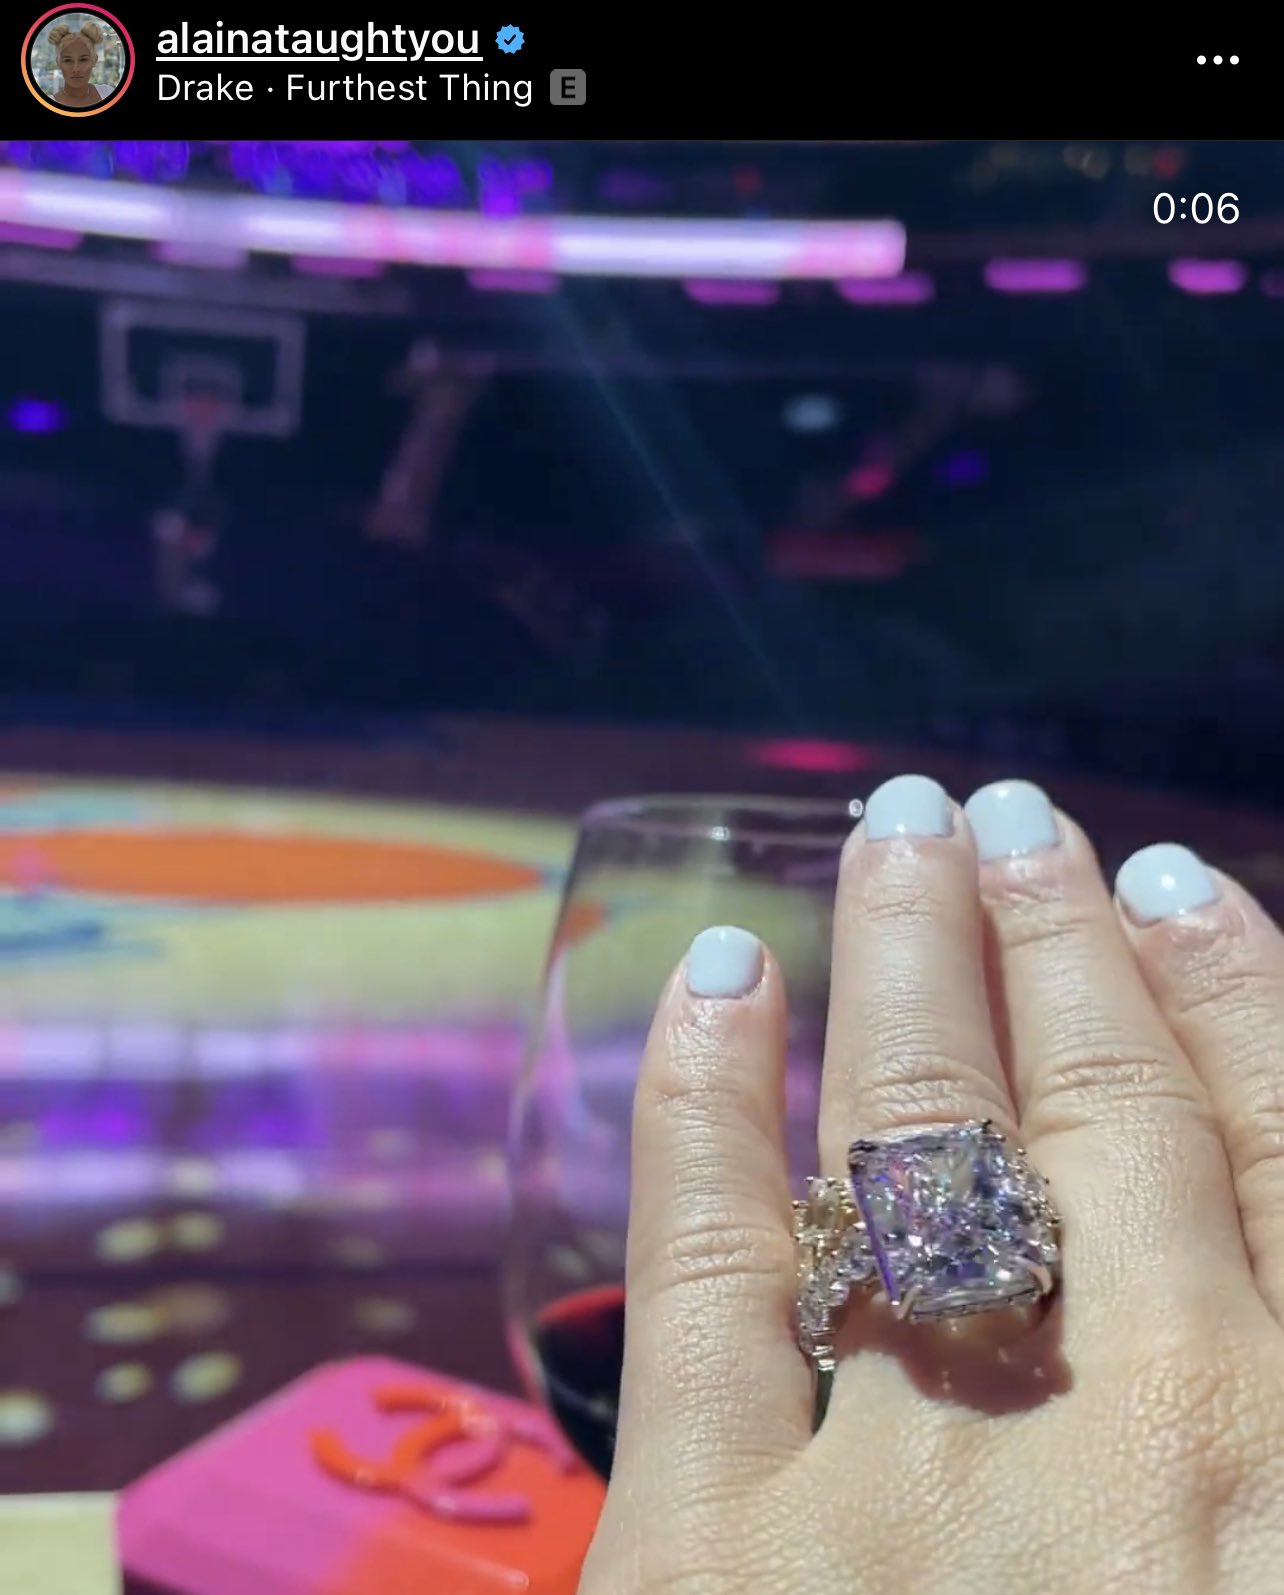 Ryan Field on Twitter: "So yeah, Derrick Rose got engaged tonight… And this  is the biggest ring I've ever seen. https://t.co/aIvBE3QmLF" / Twitter